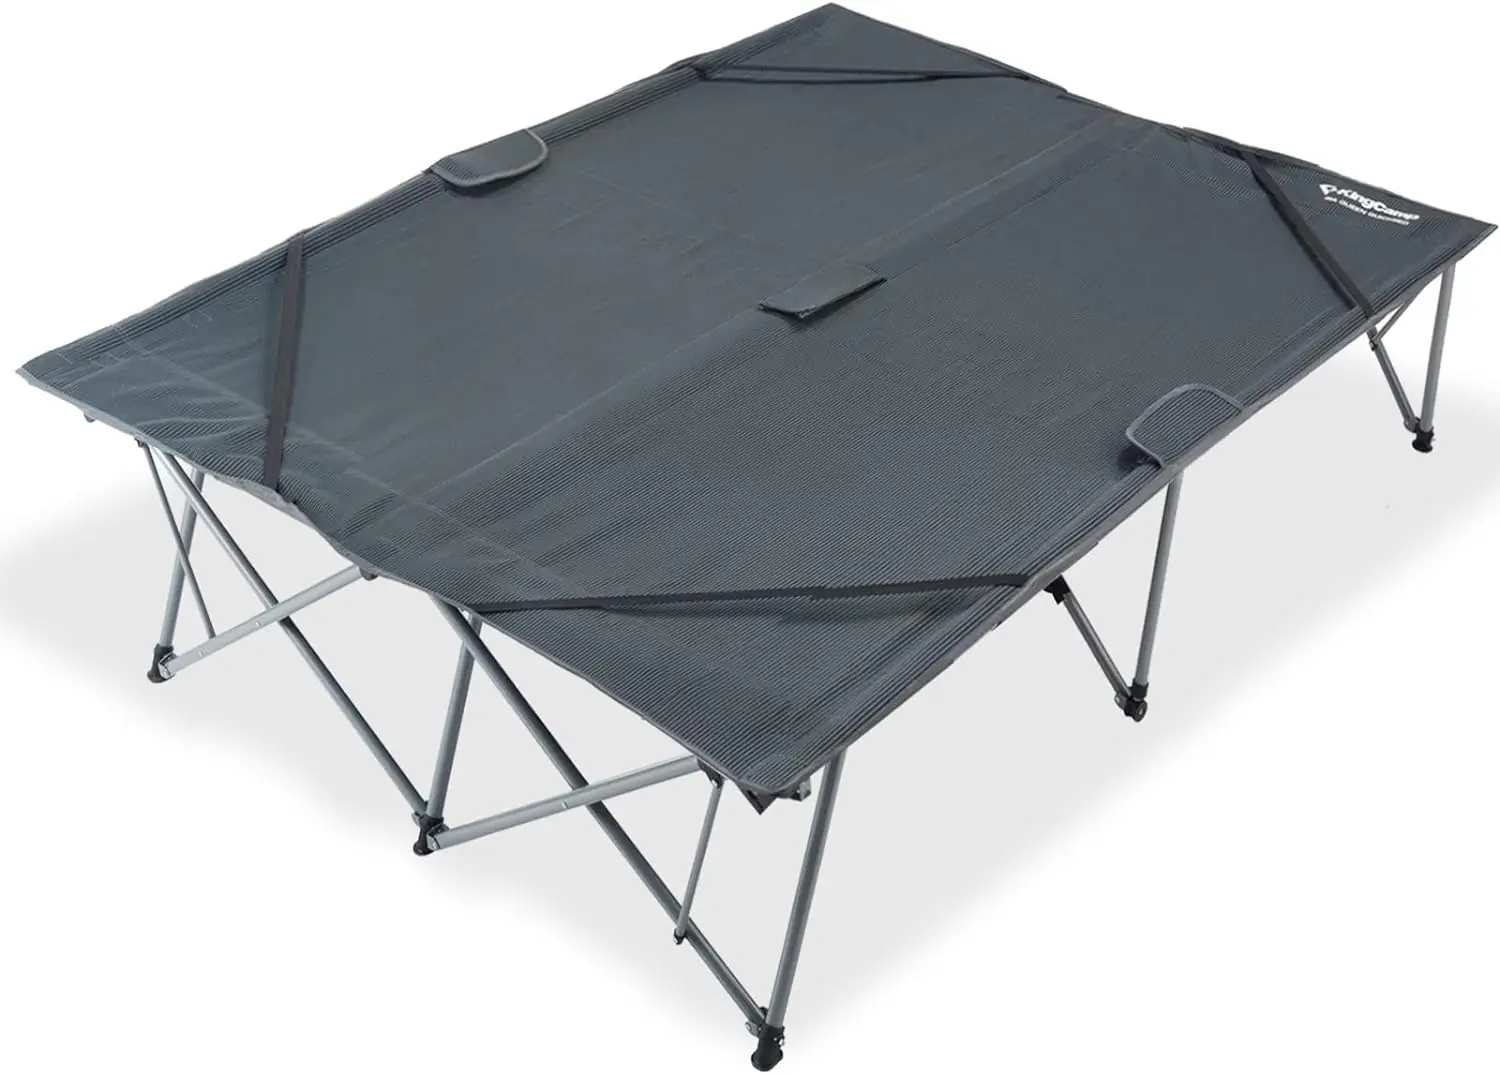 

Camping Cot Adjustable Heavy Duty Outdoor Adult Wide, 84.6''x 55.1''x18.9'', Grey-double Boat add ons person kayak Throw bag